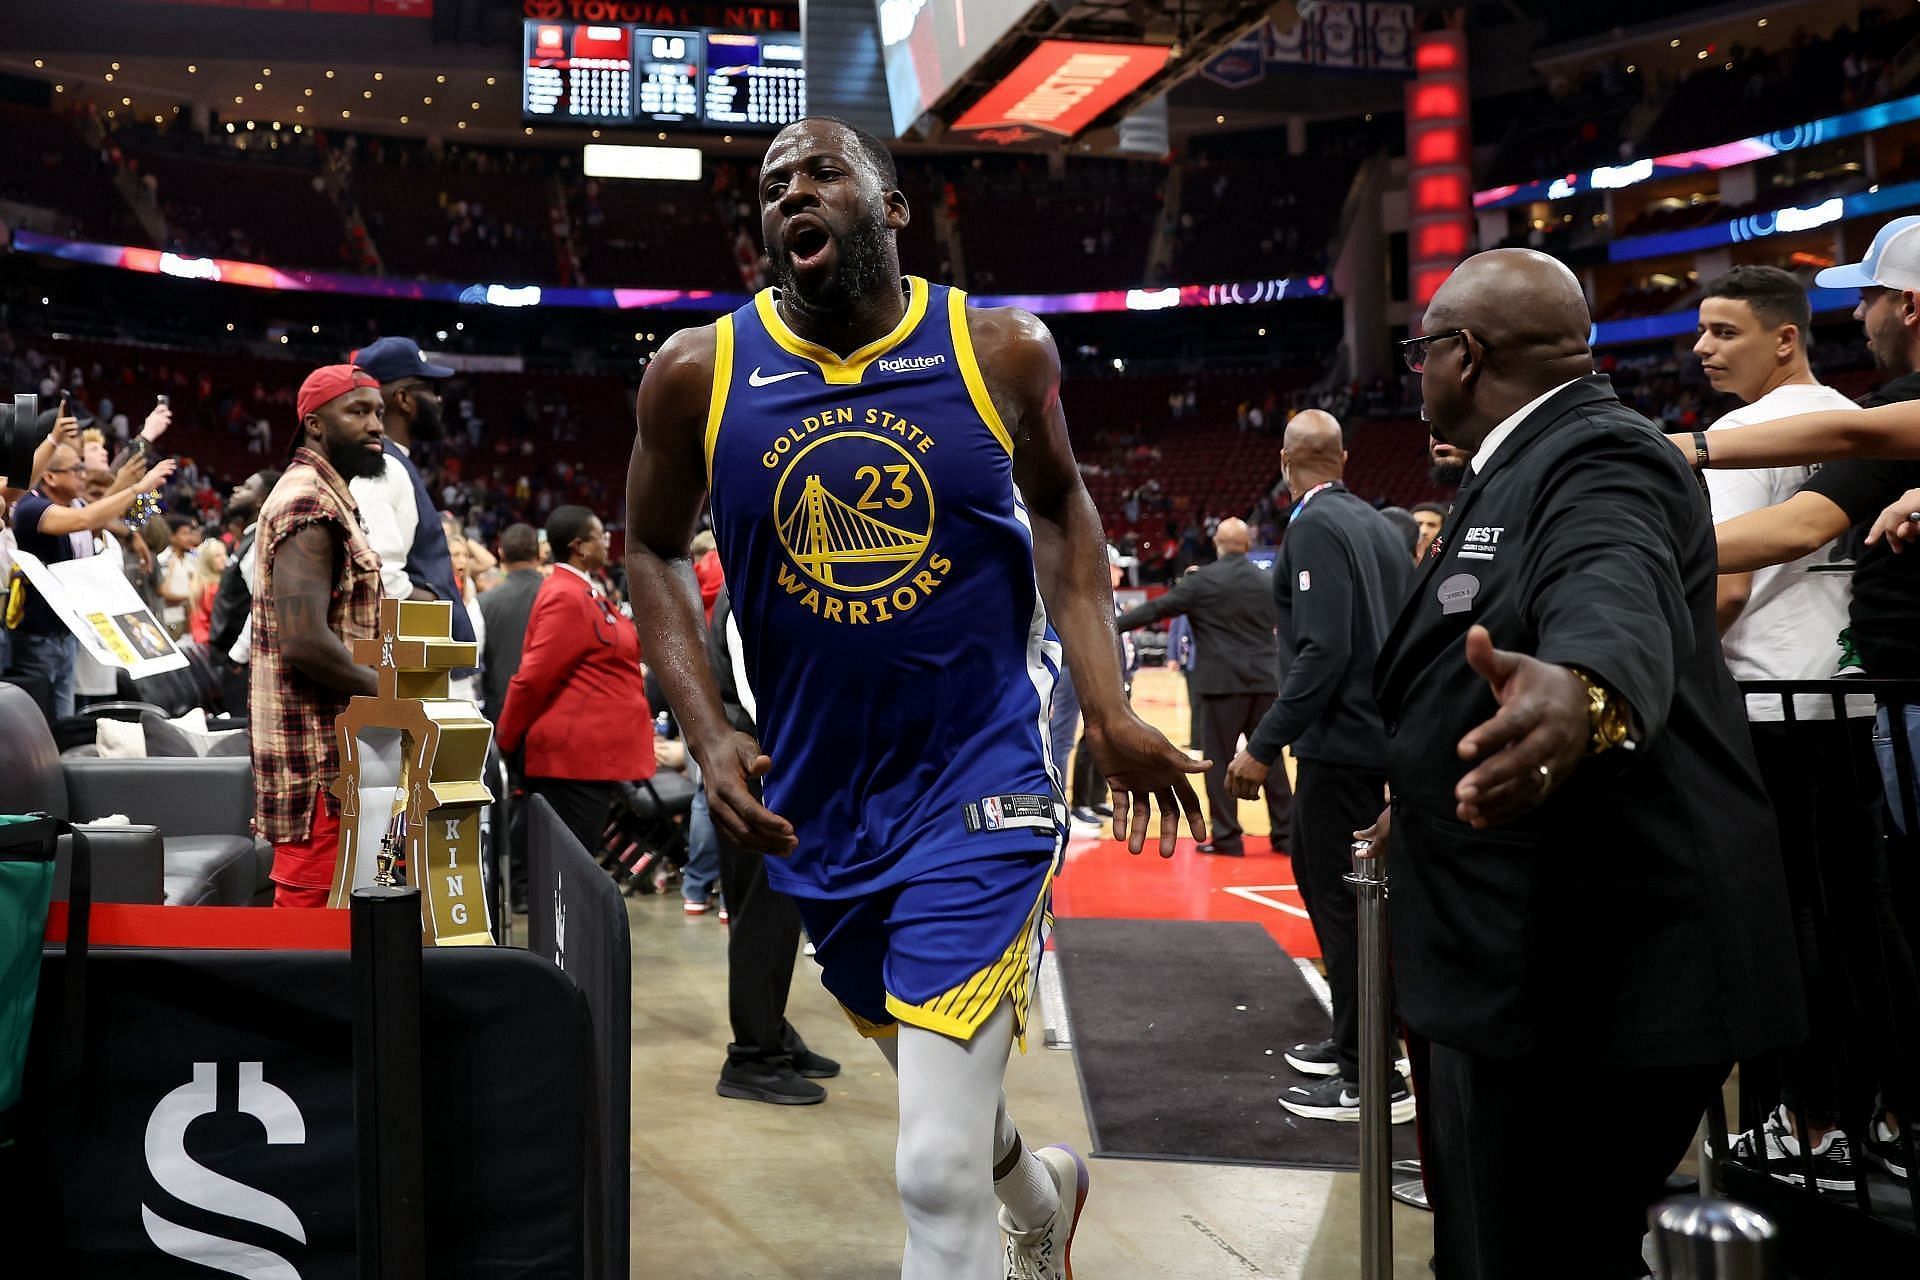 Fans react to Draymond Green at the Warriors